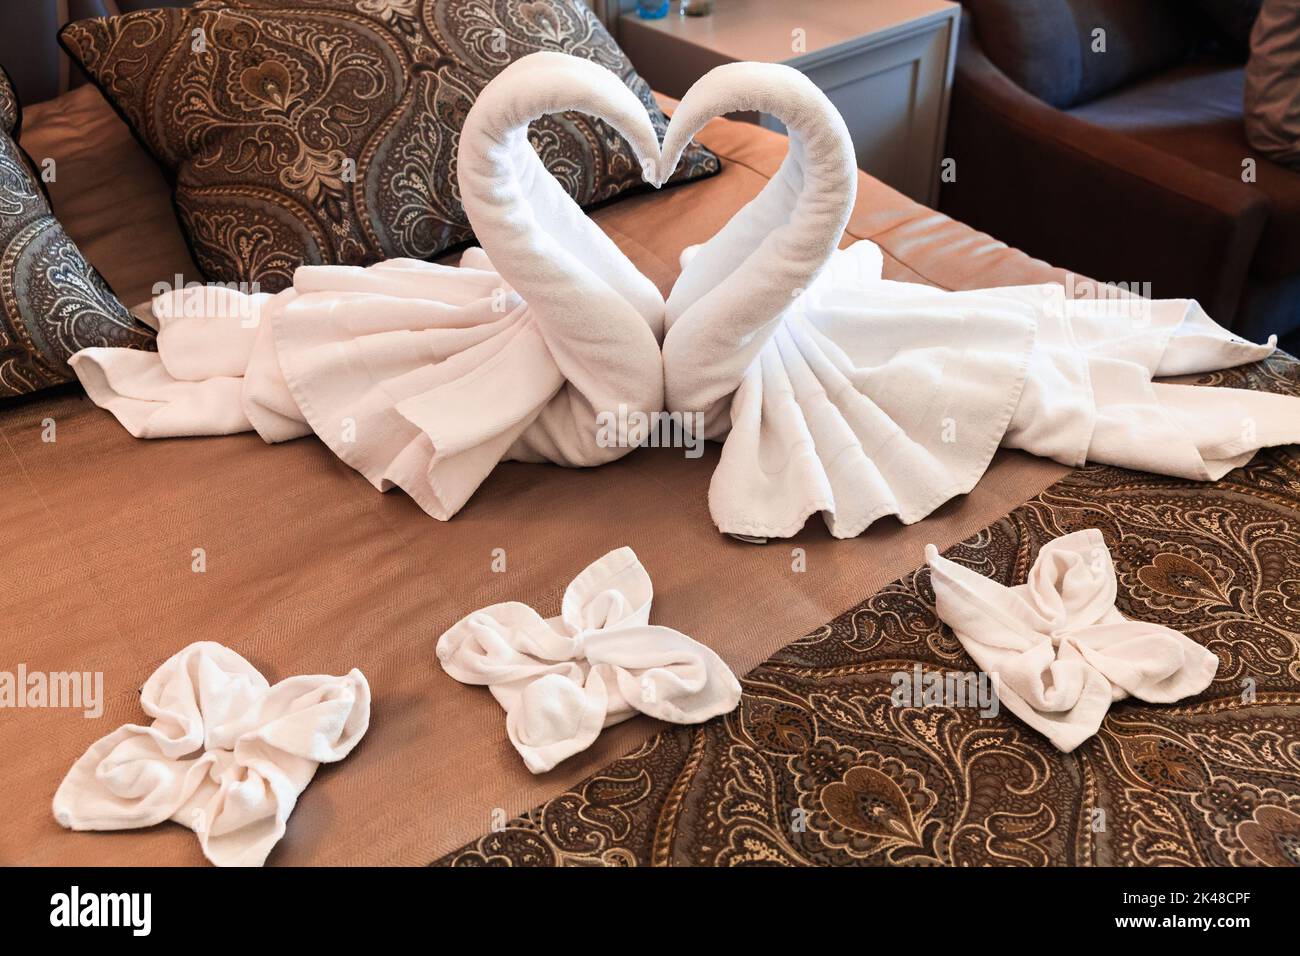 Swans made of white towels, romantic hotel bedroom decoration of a honeymoon suite Stock Photo